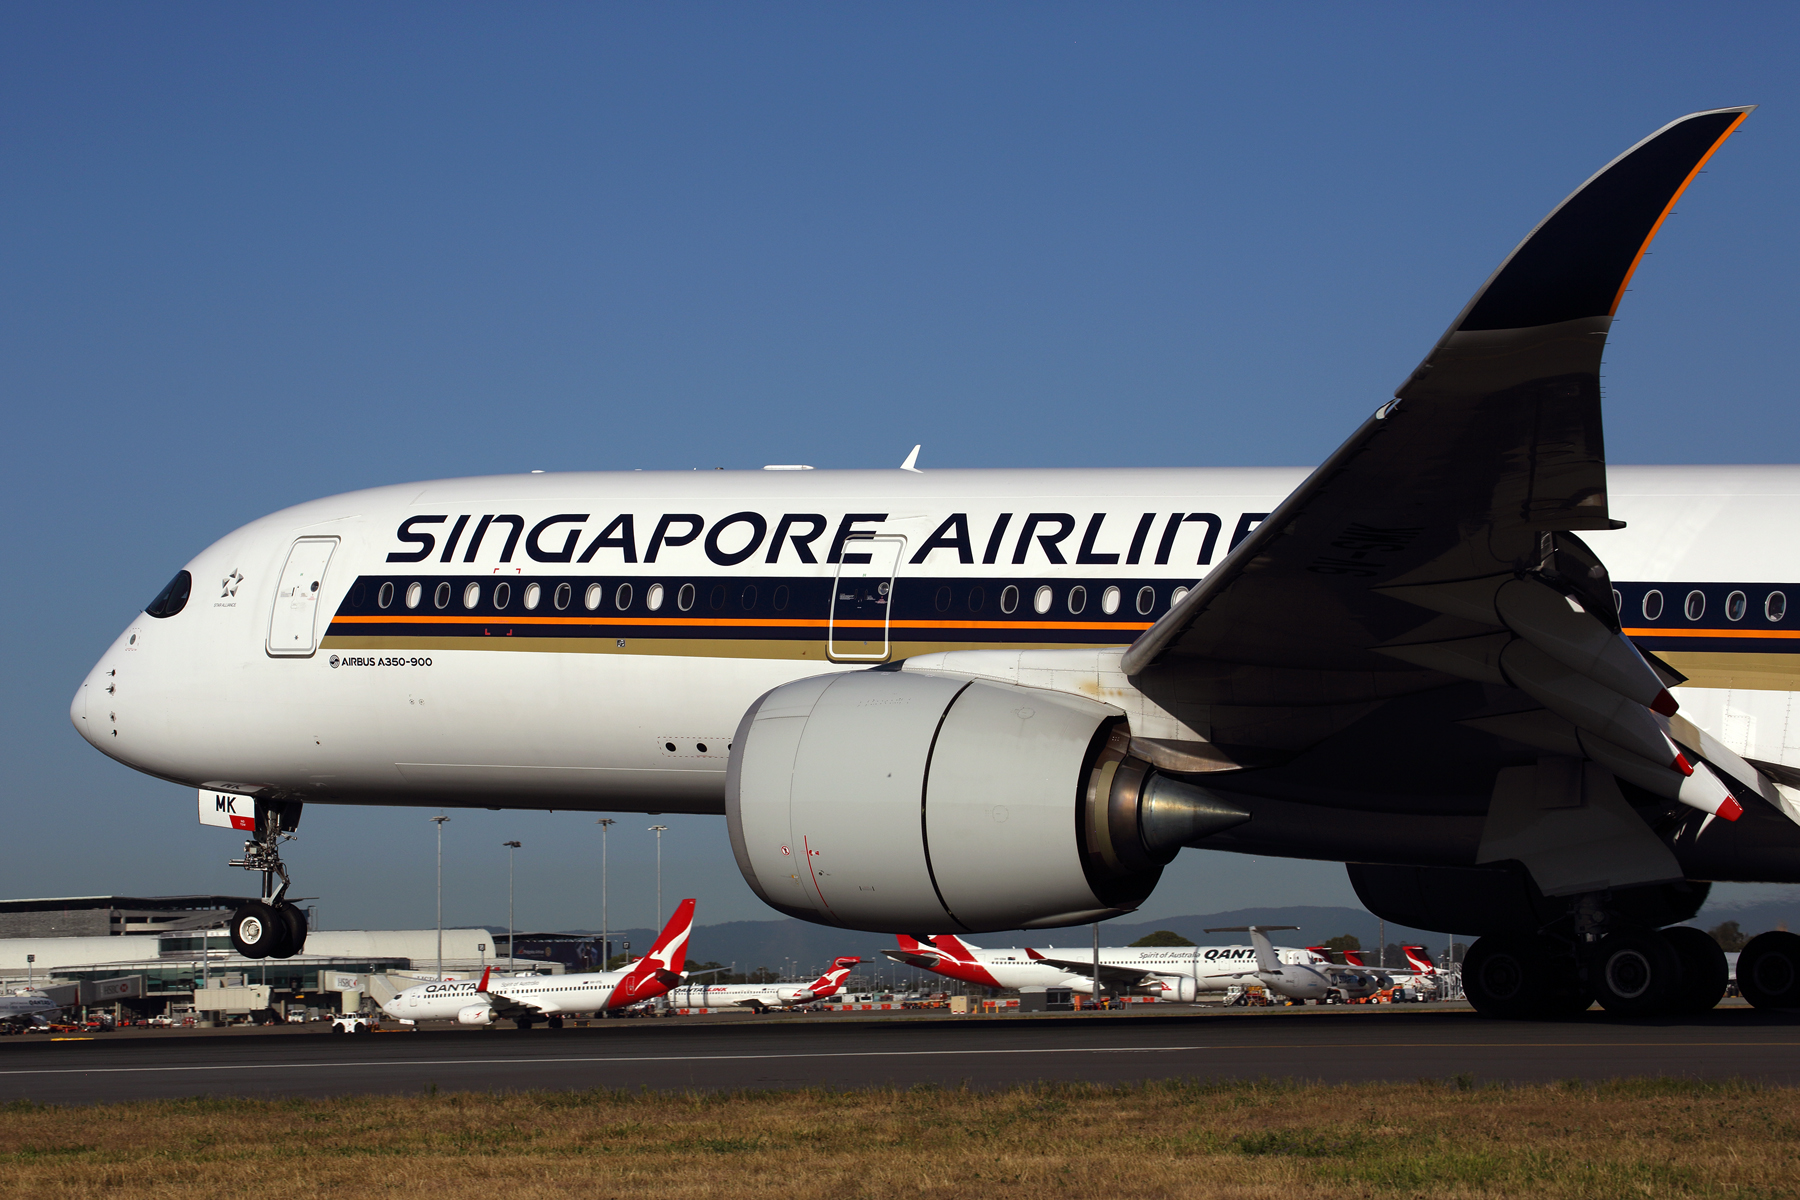 SINGAPORE_AIRLINES_AIRBUS_A350_900_BNE_RF_5K5A6962.jpg